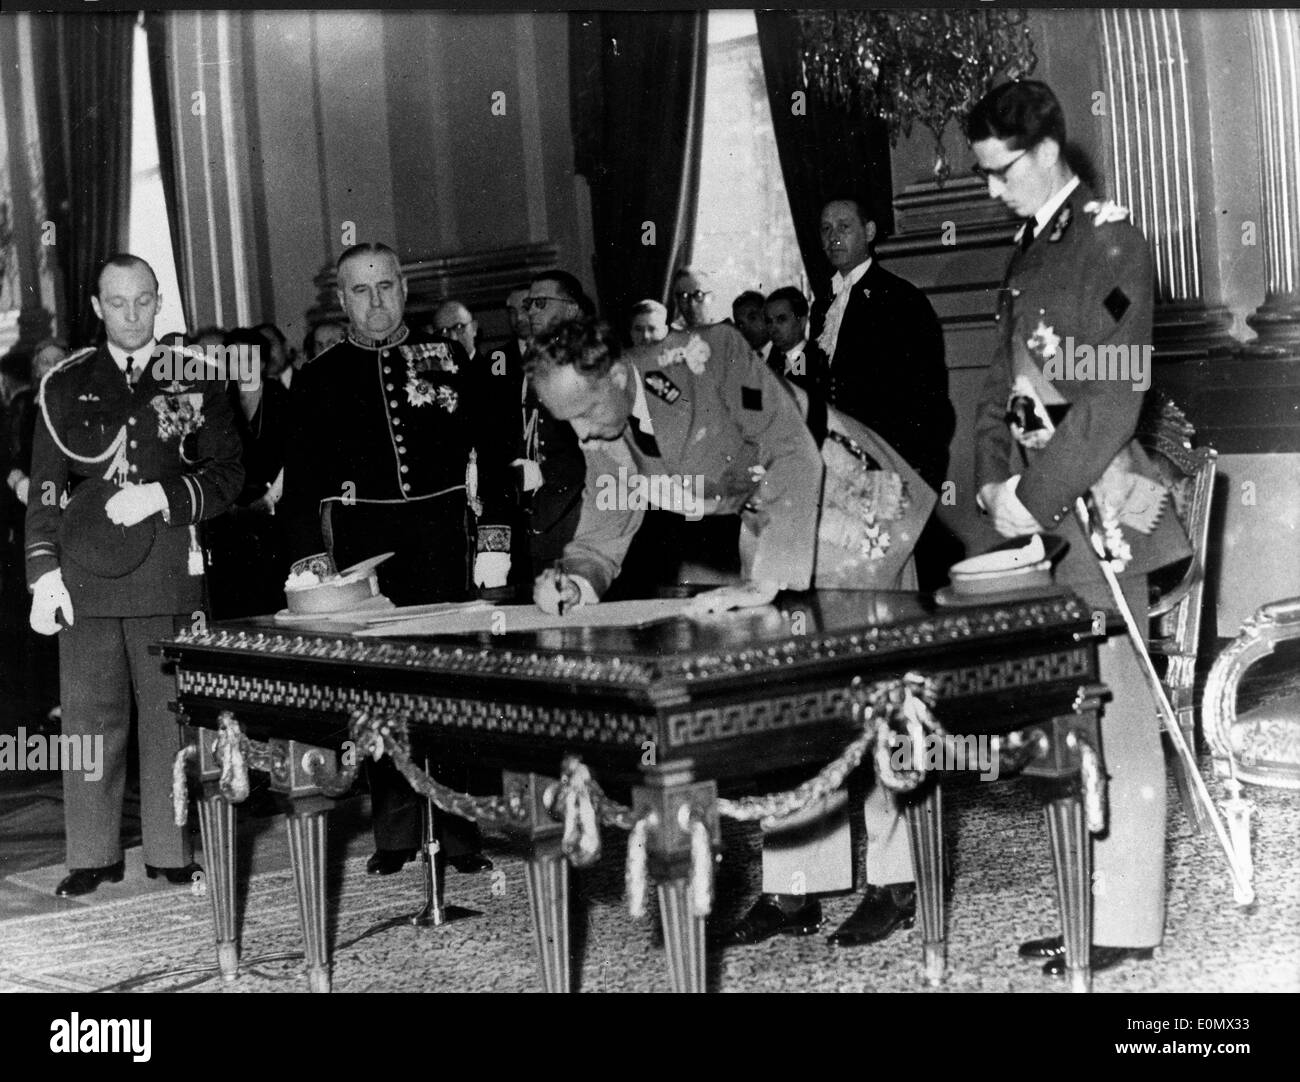 King Leopold III signing a document Stock Photo